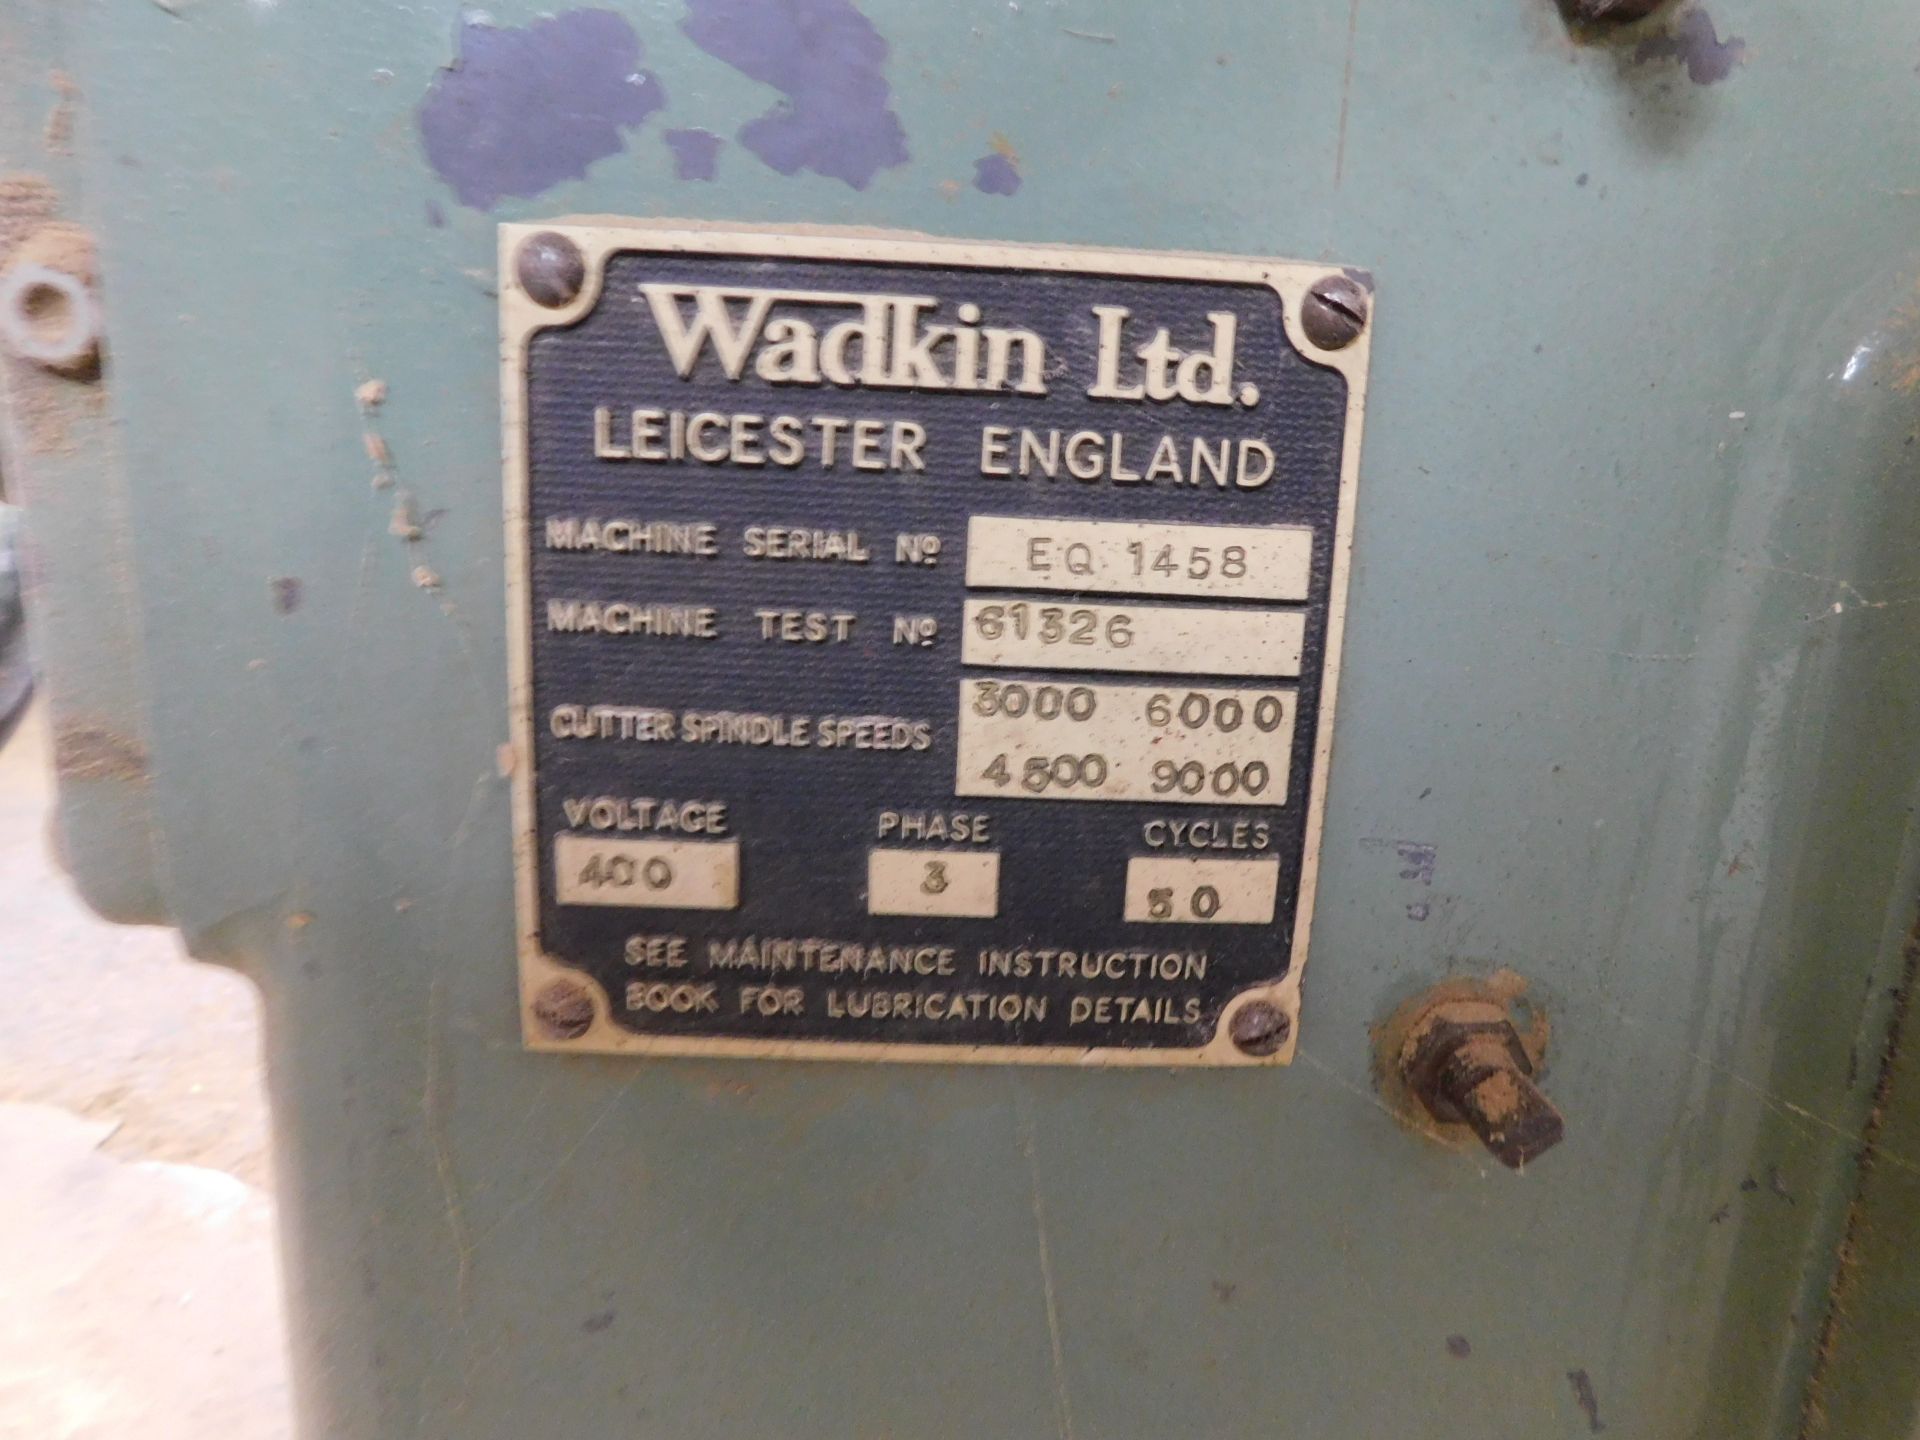 Wadkin Spindle Moulder Serial Number EQ1458 with Co-Matic AF34 Roller Power Feed Unit - Image 3 of 3